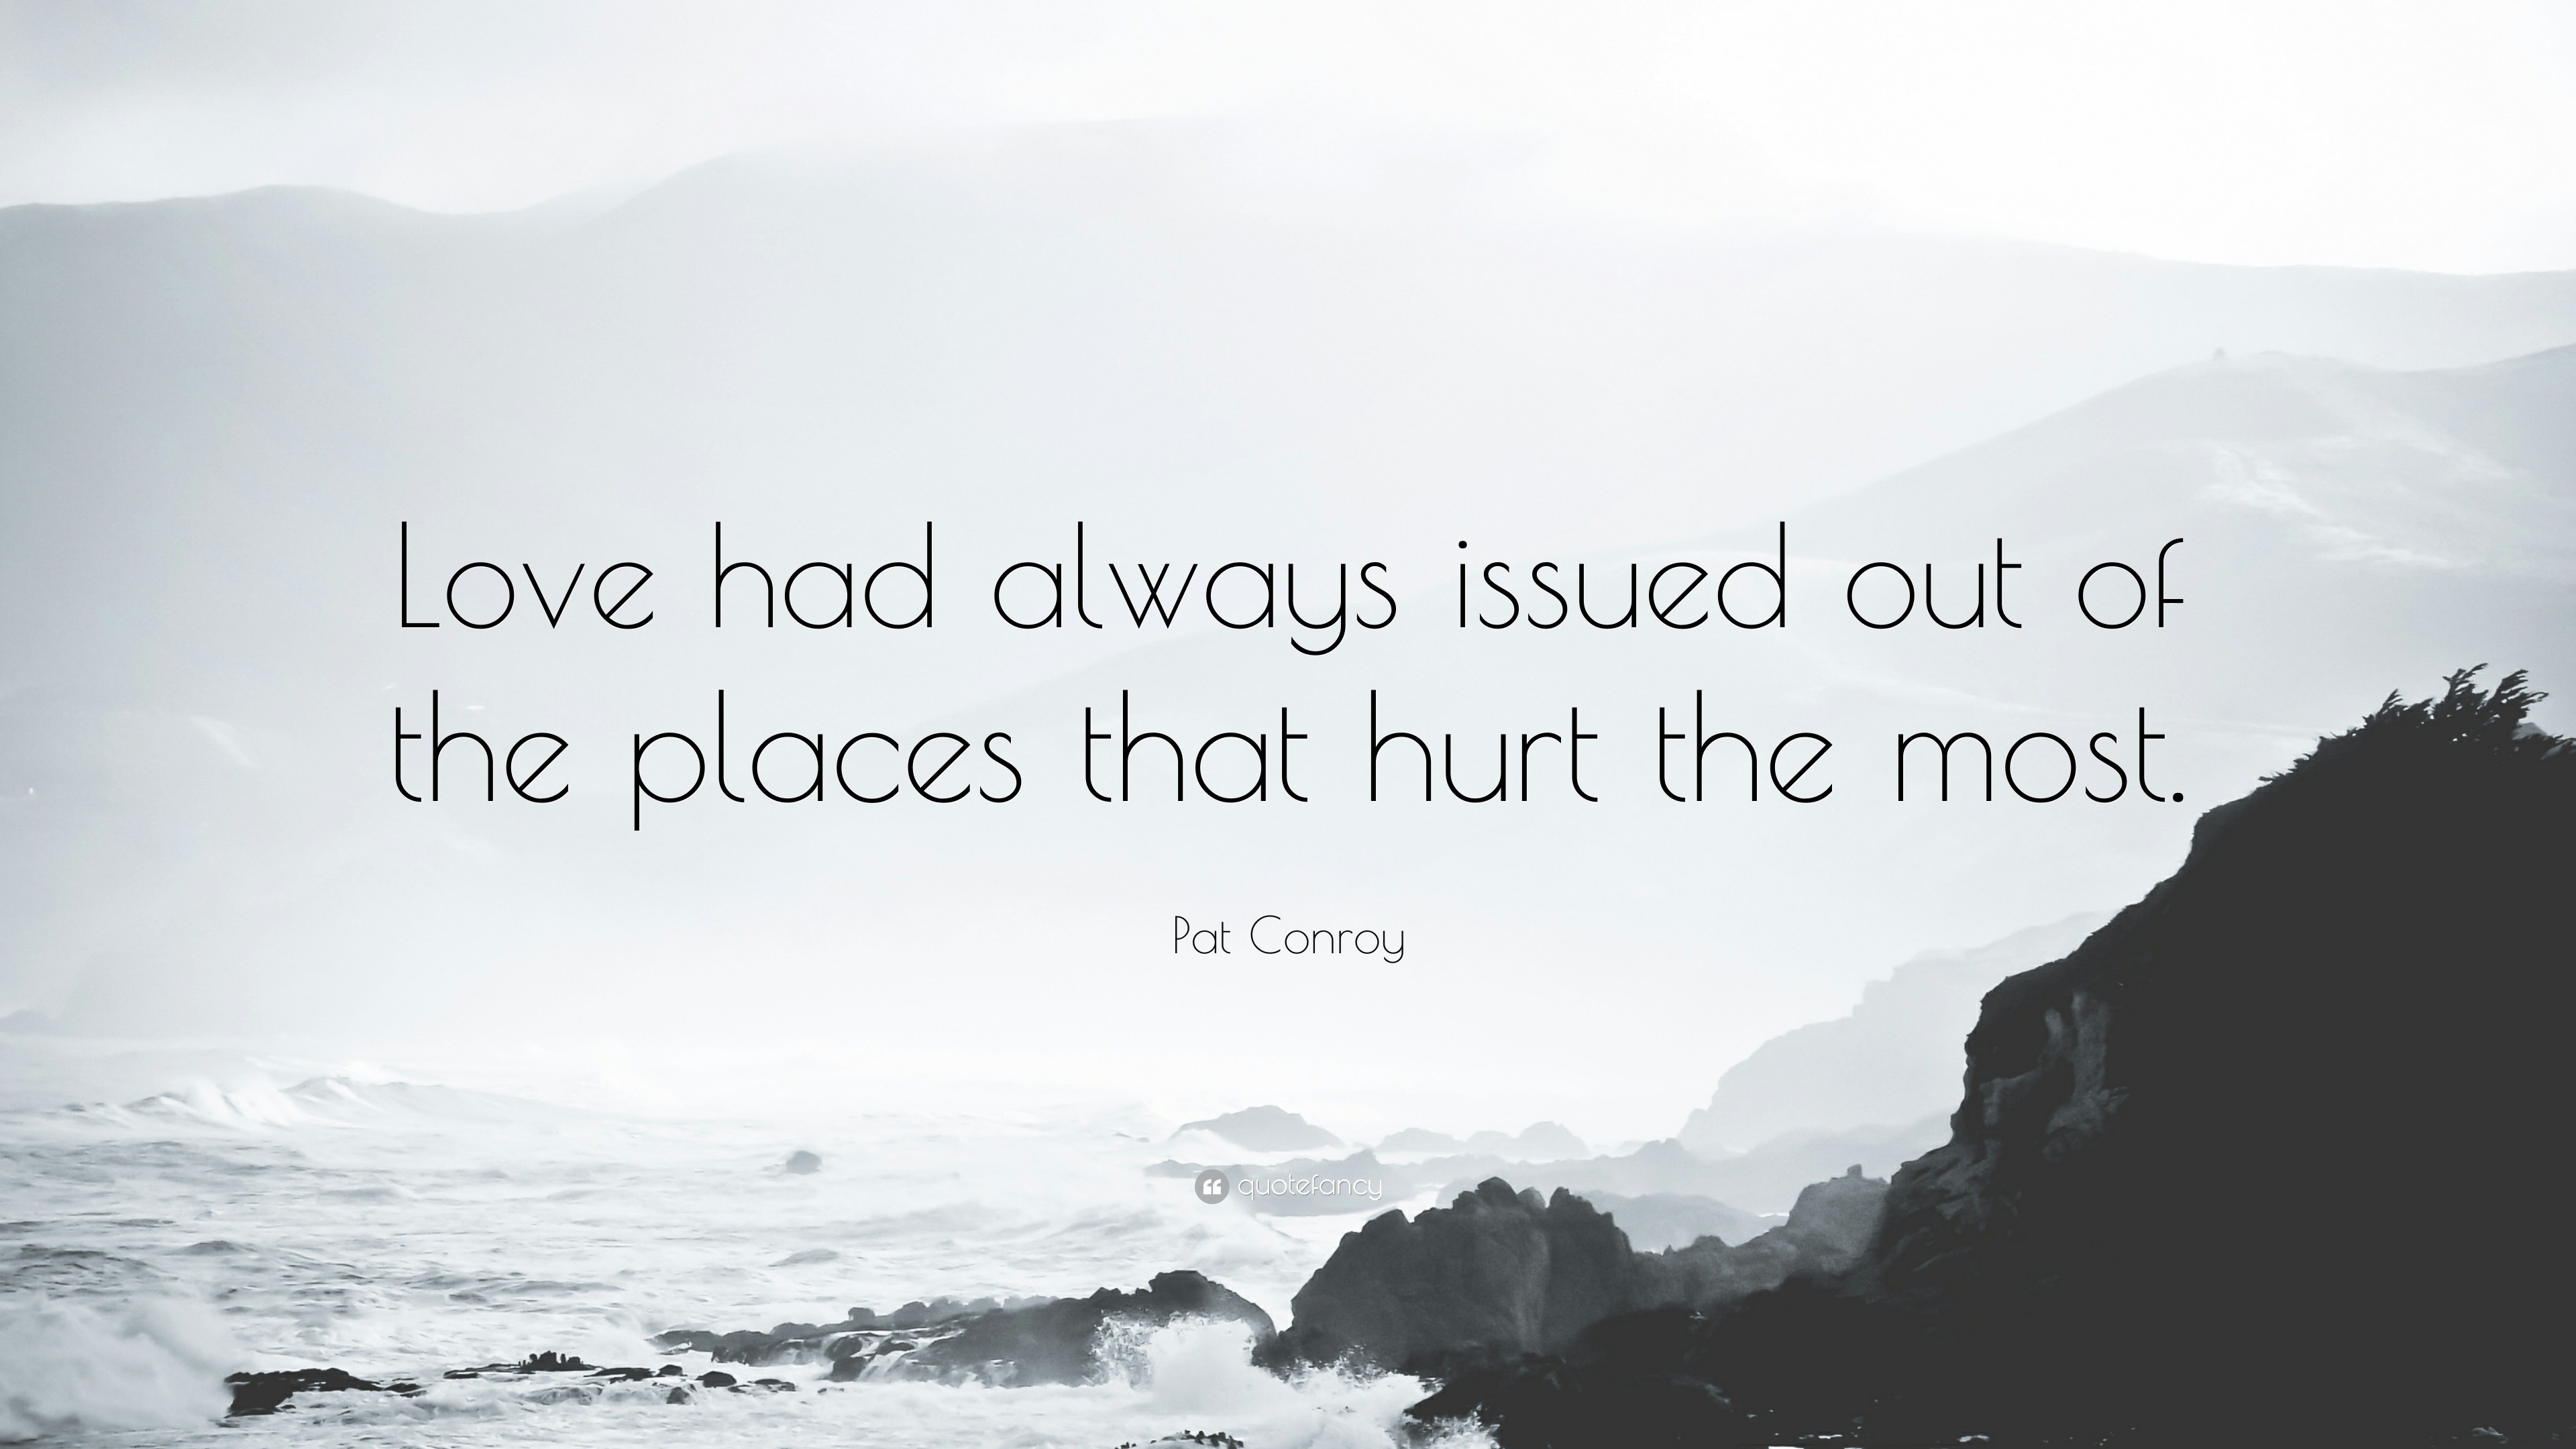 Pat Conroy Quote “Love had always issued out of the places that hurt the